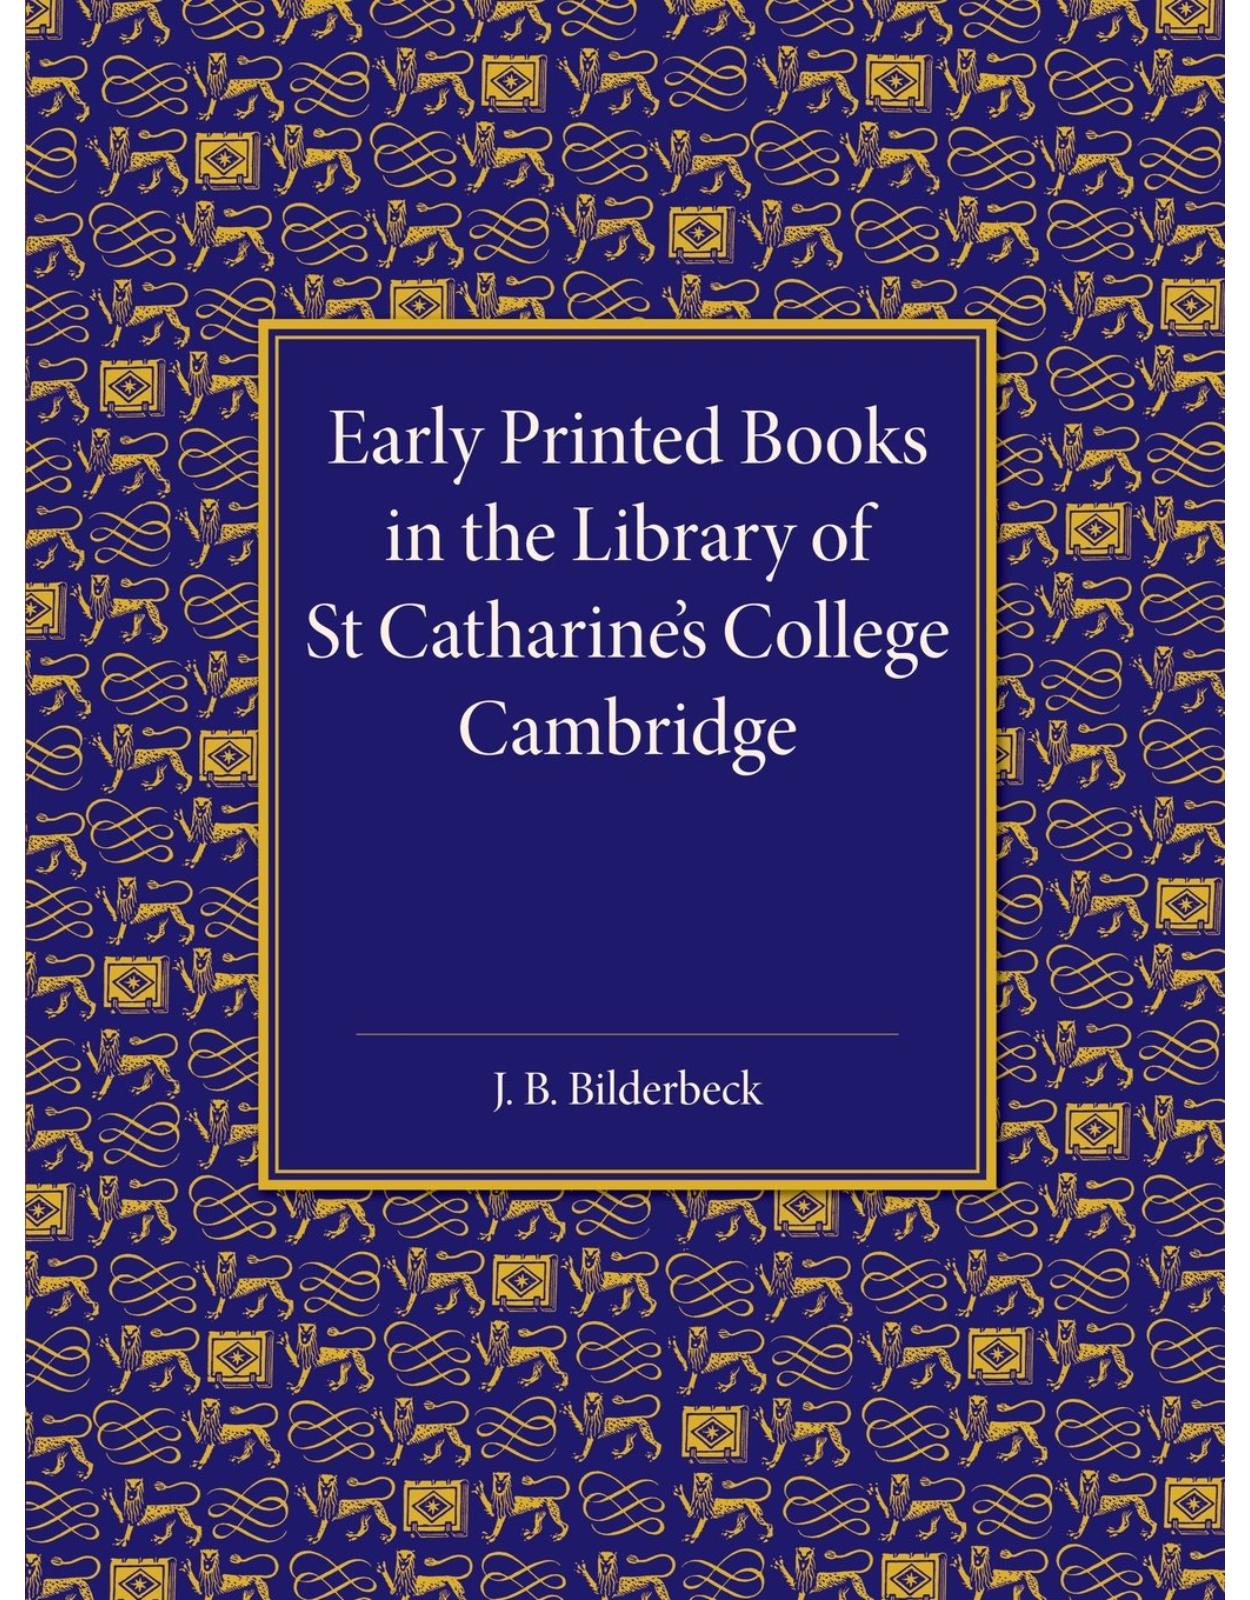 Early Printed Books in the Library of St Catharine's College Cambridge